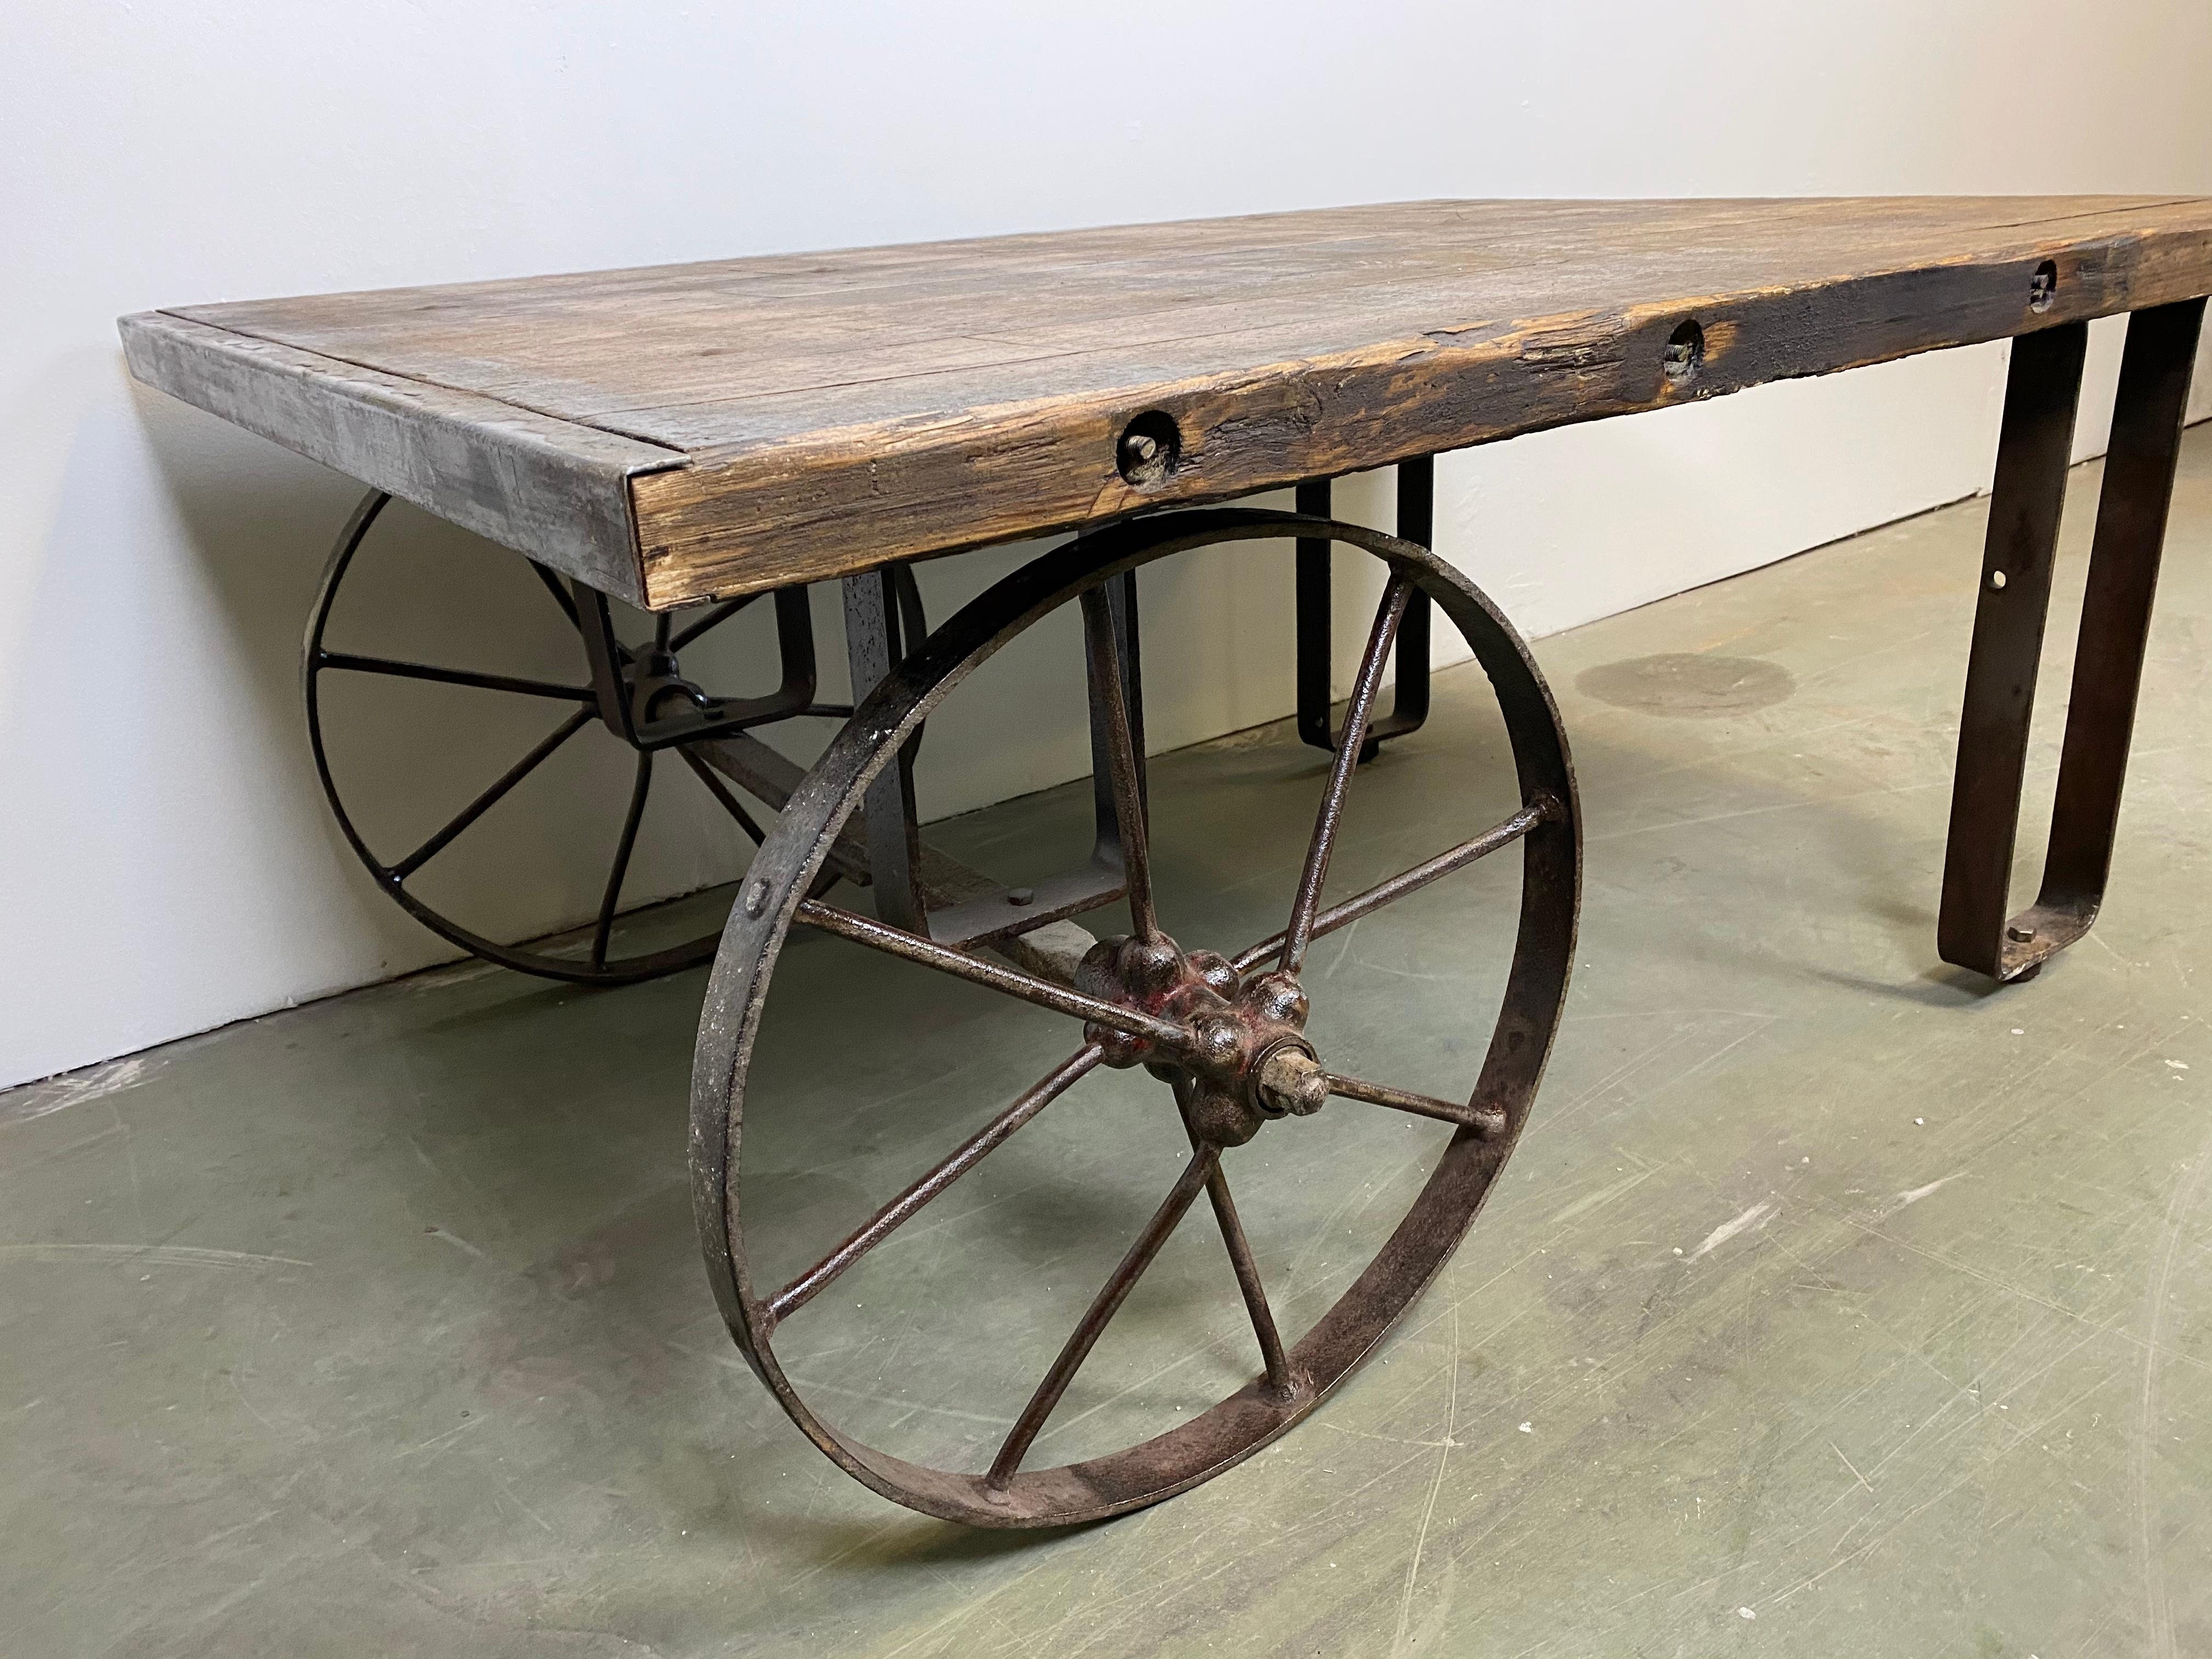 This is an industrial coffee table from the 1950s. It features cast iron legs and a solid old wooden plate with very nice patina. Weight: 75kg.